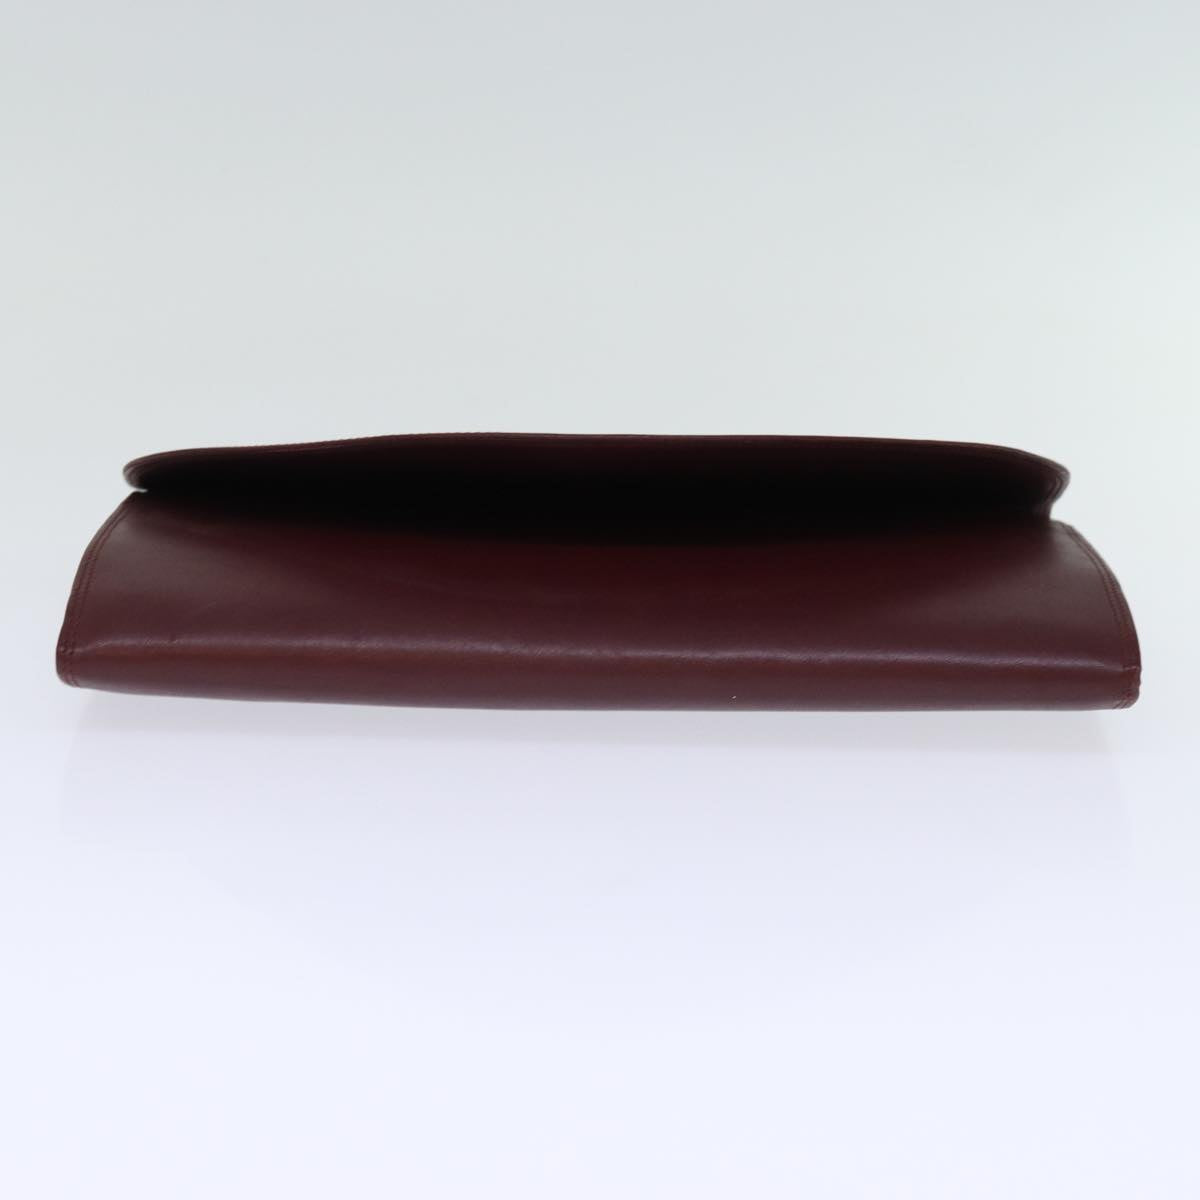 CARTIER Clutch Bag Leather Wine Red Auth bs14277